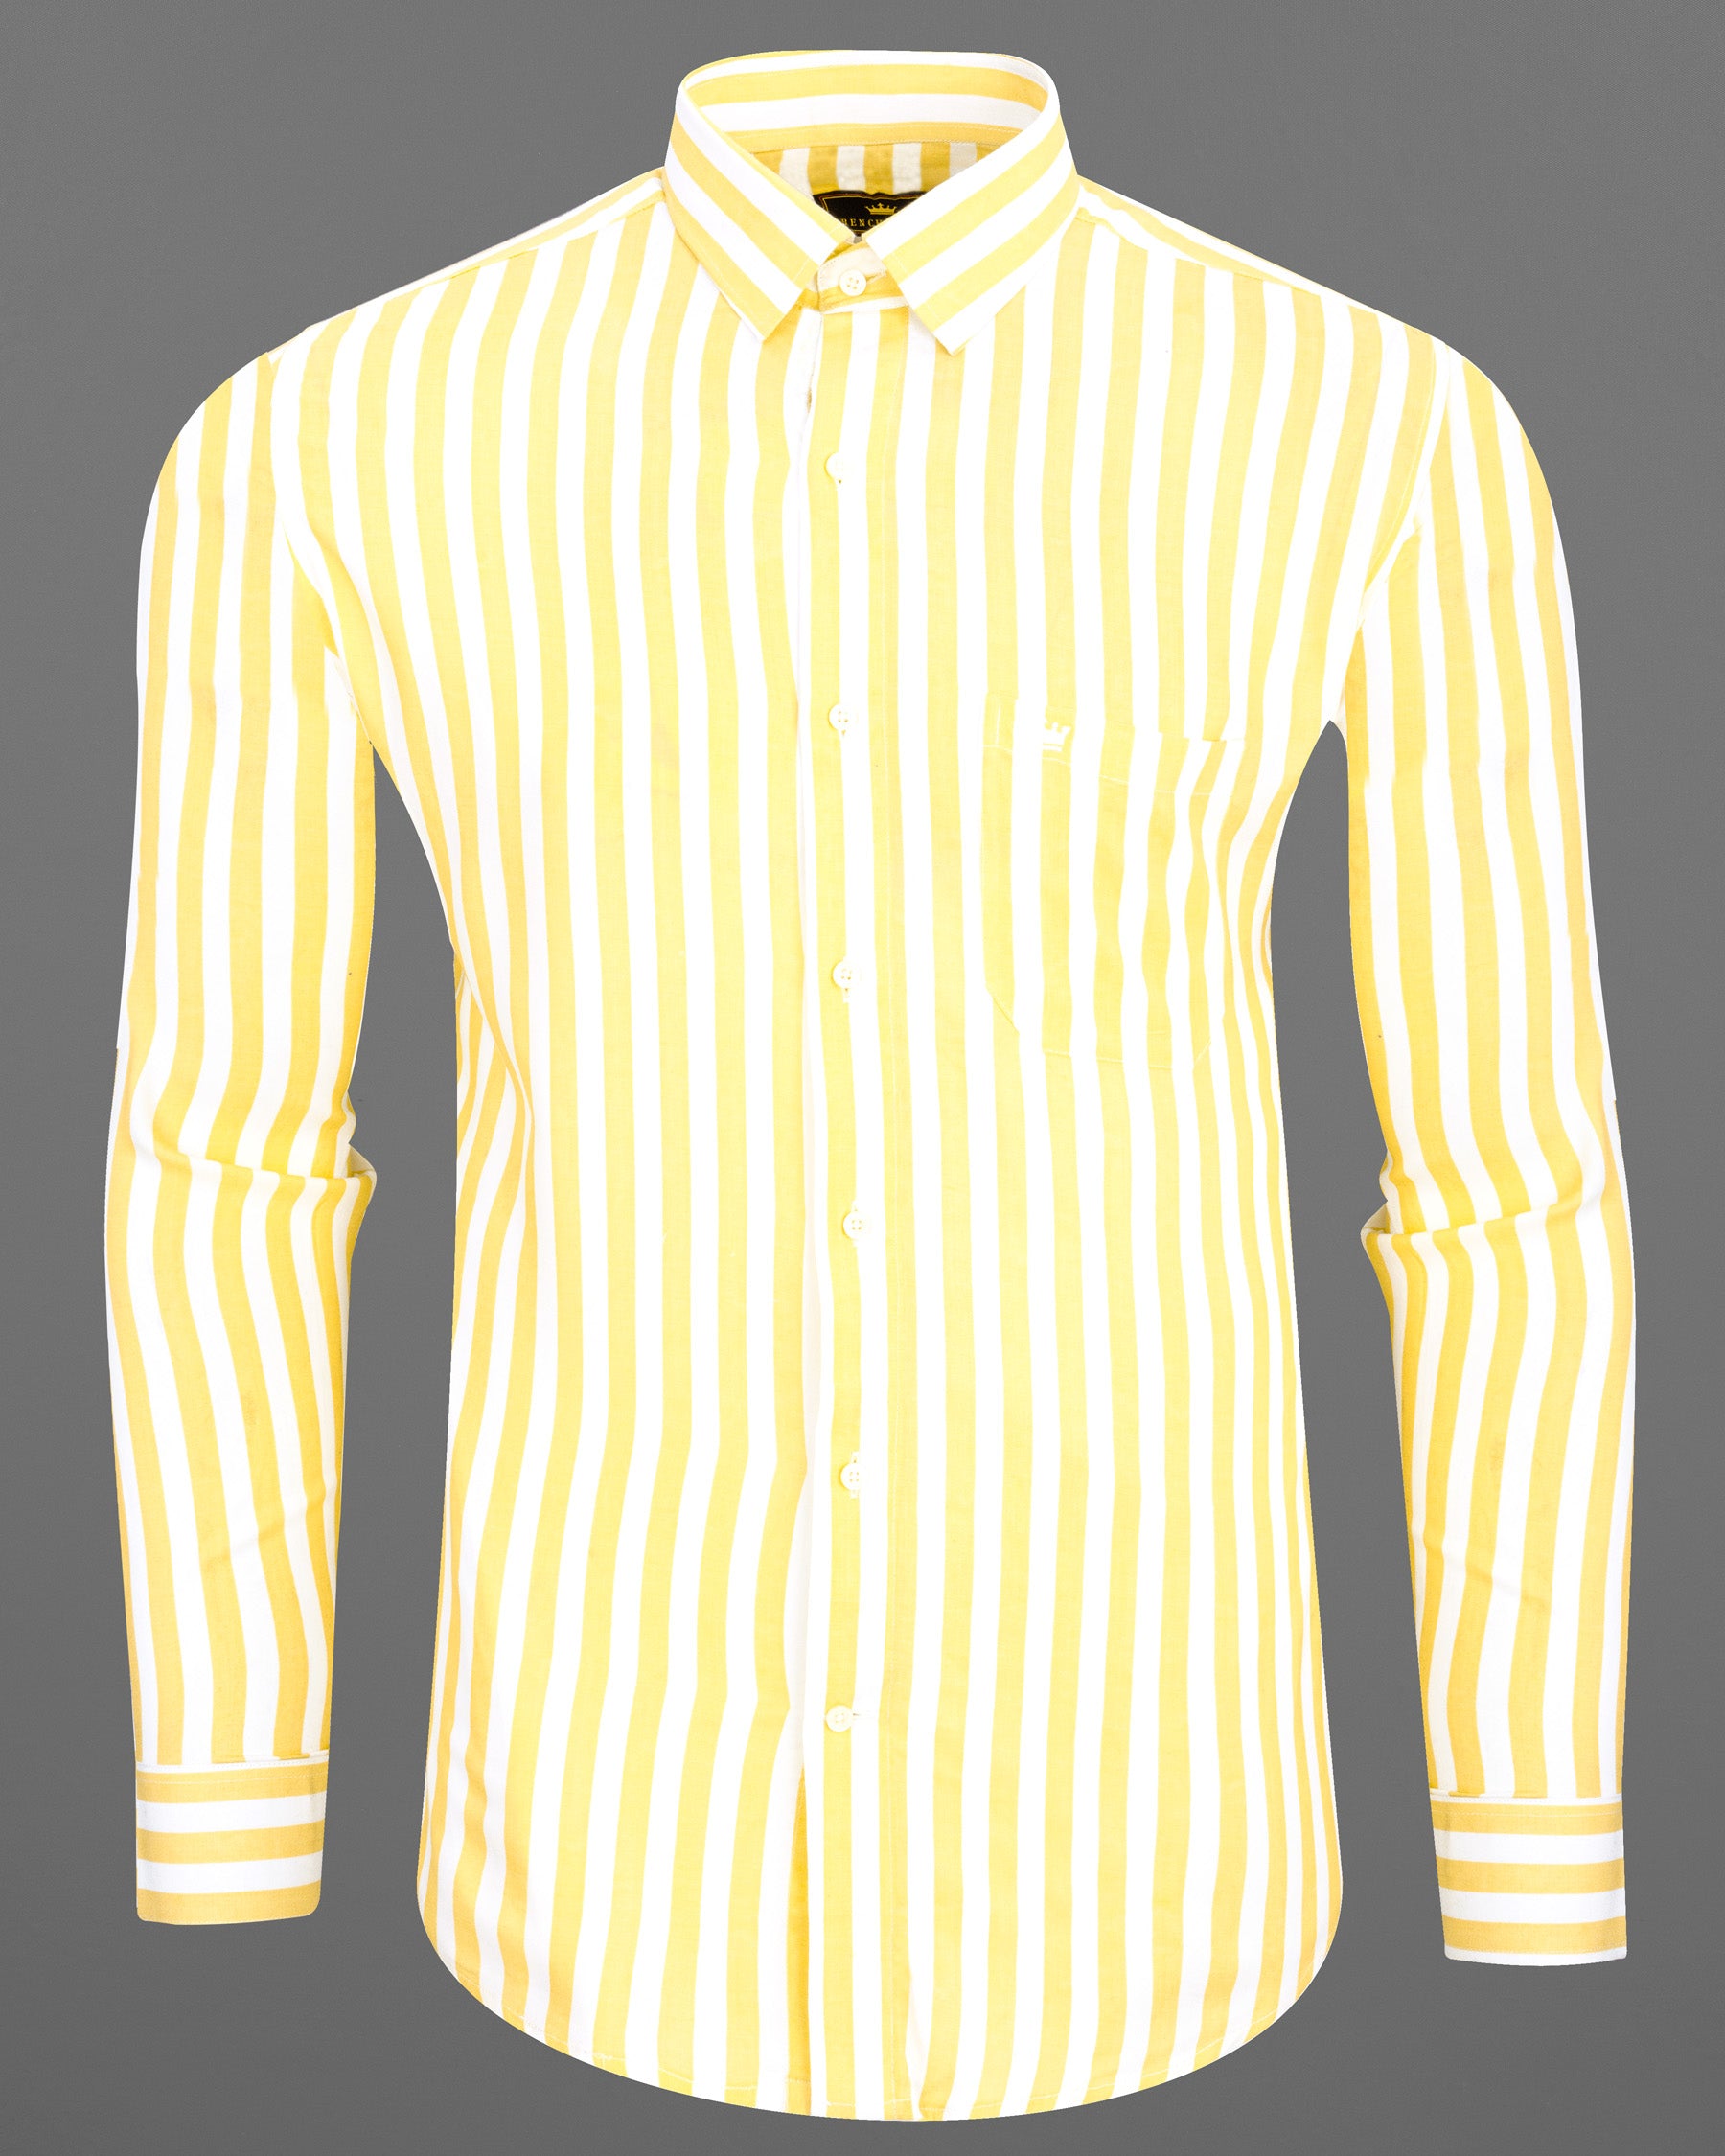 Colonial Yellow and Bright White Striped Premium Tencel Shirt 6774-38,6774-38,6774-39,6774-39,6774-40,6774-40,6774-42,6774-42,6774-44,6774-44,6774-46,6774-46,6774-48,6774-48,6774-50,6774-50,6774-52,6774-52